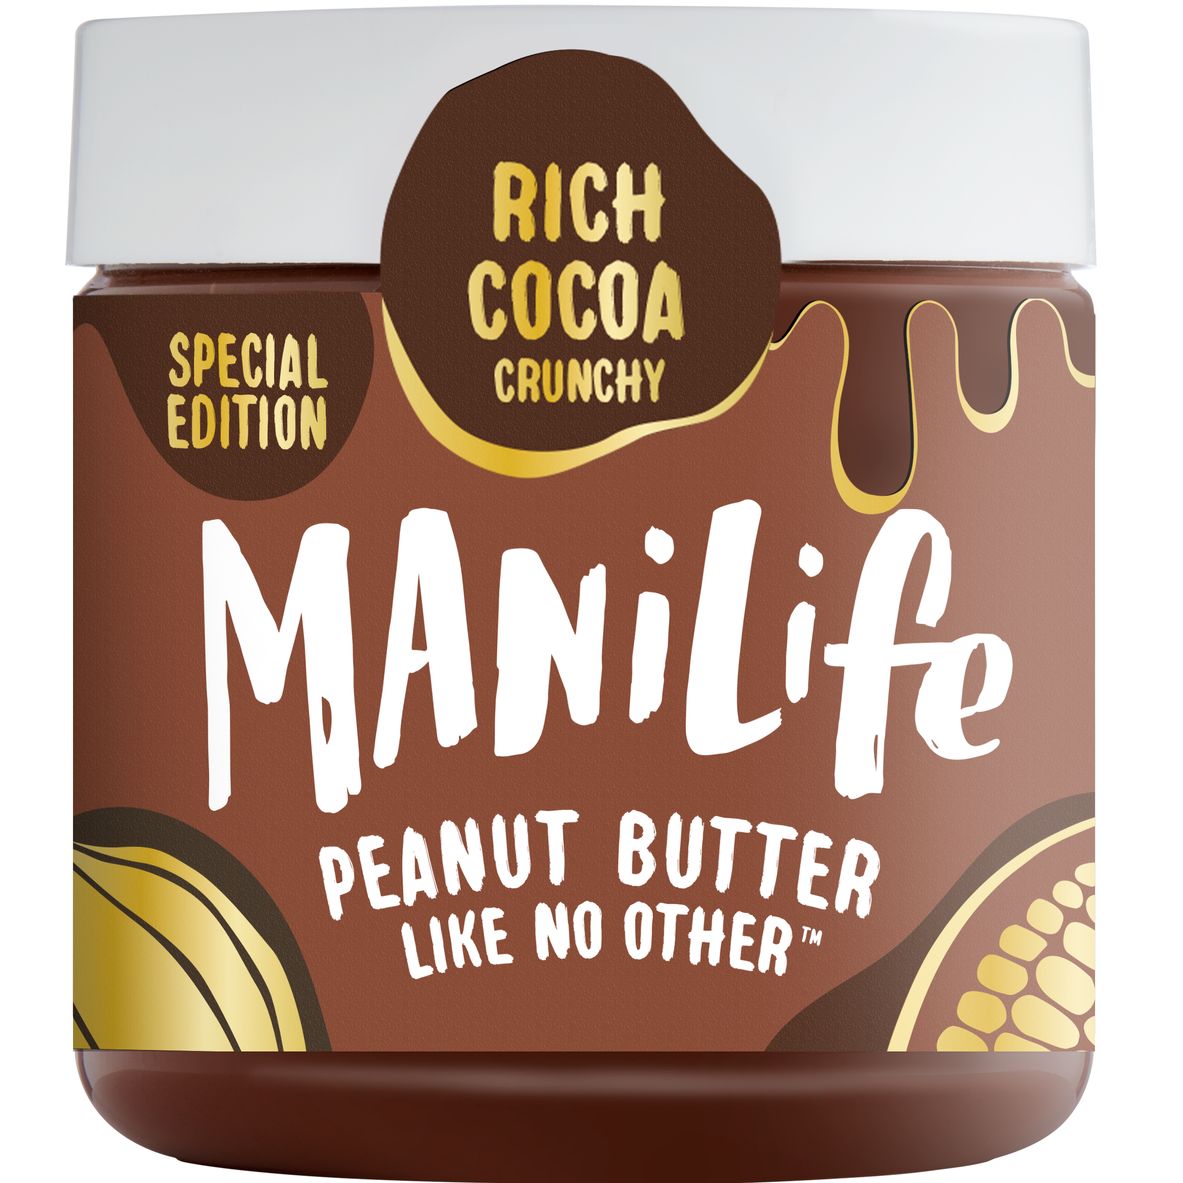 ManiLife expands flavoured peanut butter range with new variant